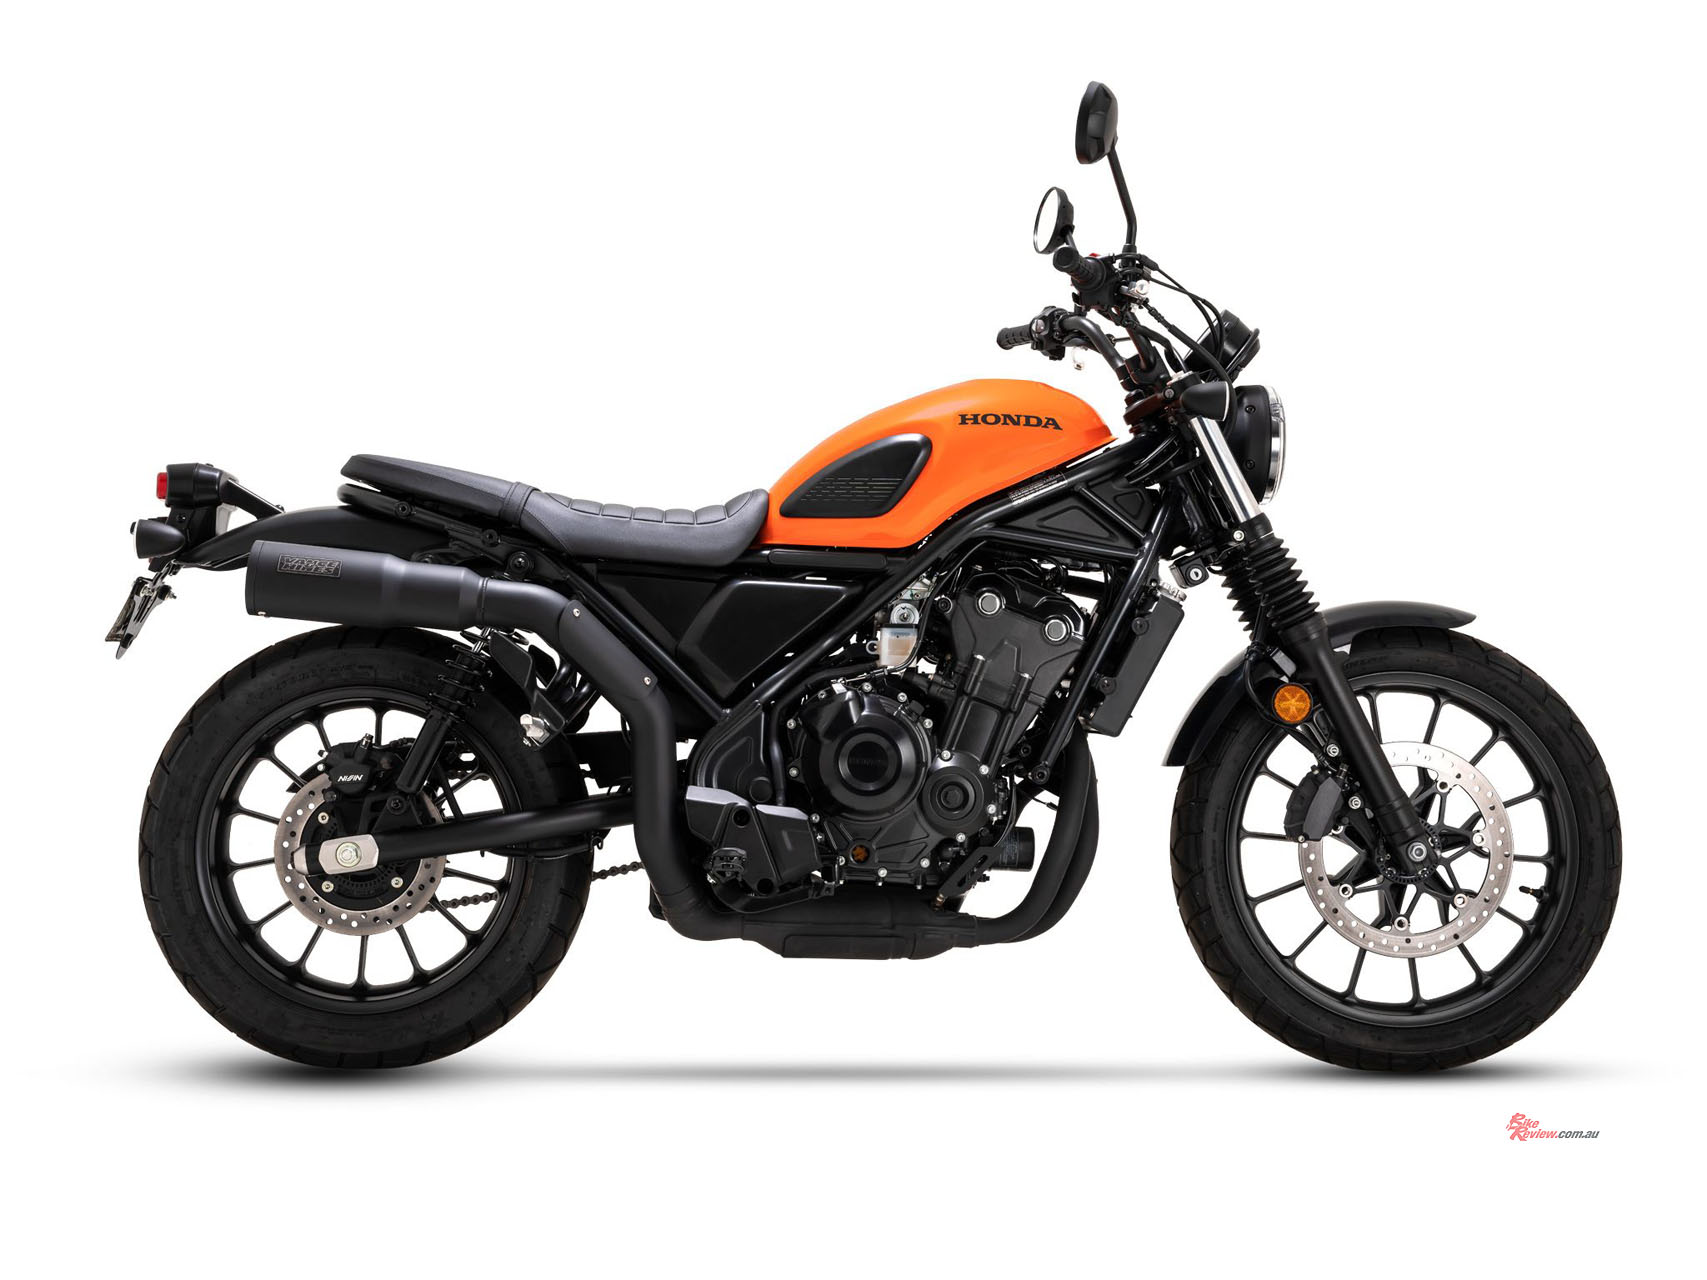 The Hi-Output Vance and Hines Slip-on is the essential anti-suppressor to uncork the fun from the Honda SCL500 with an exhilarating roar that lets everyone know you're coming through.